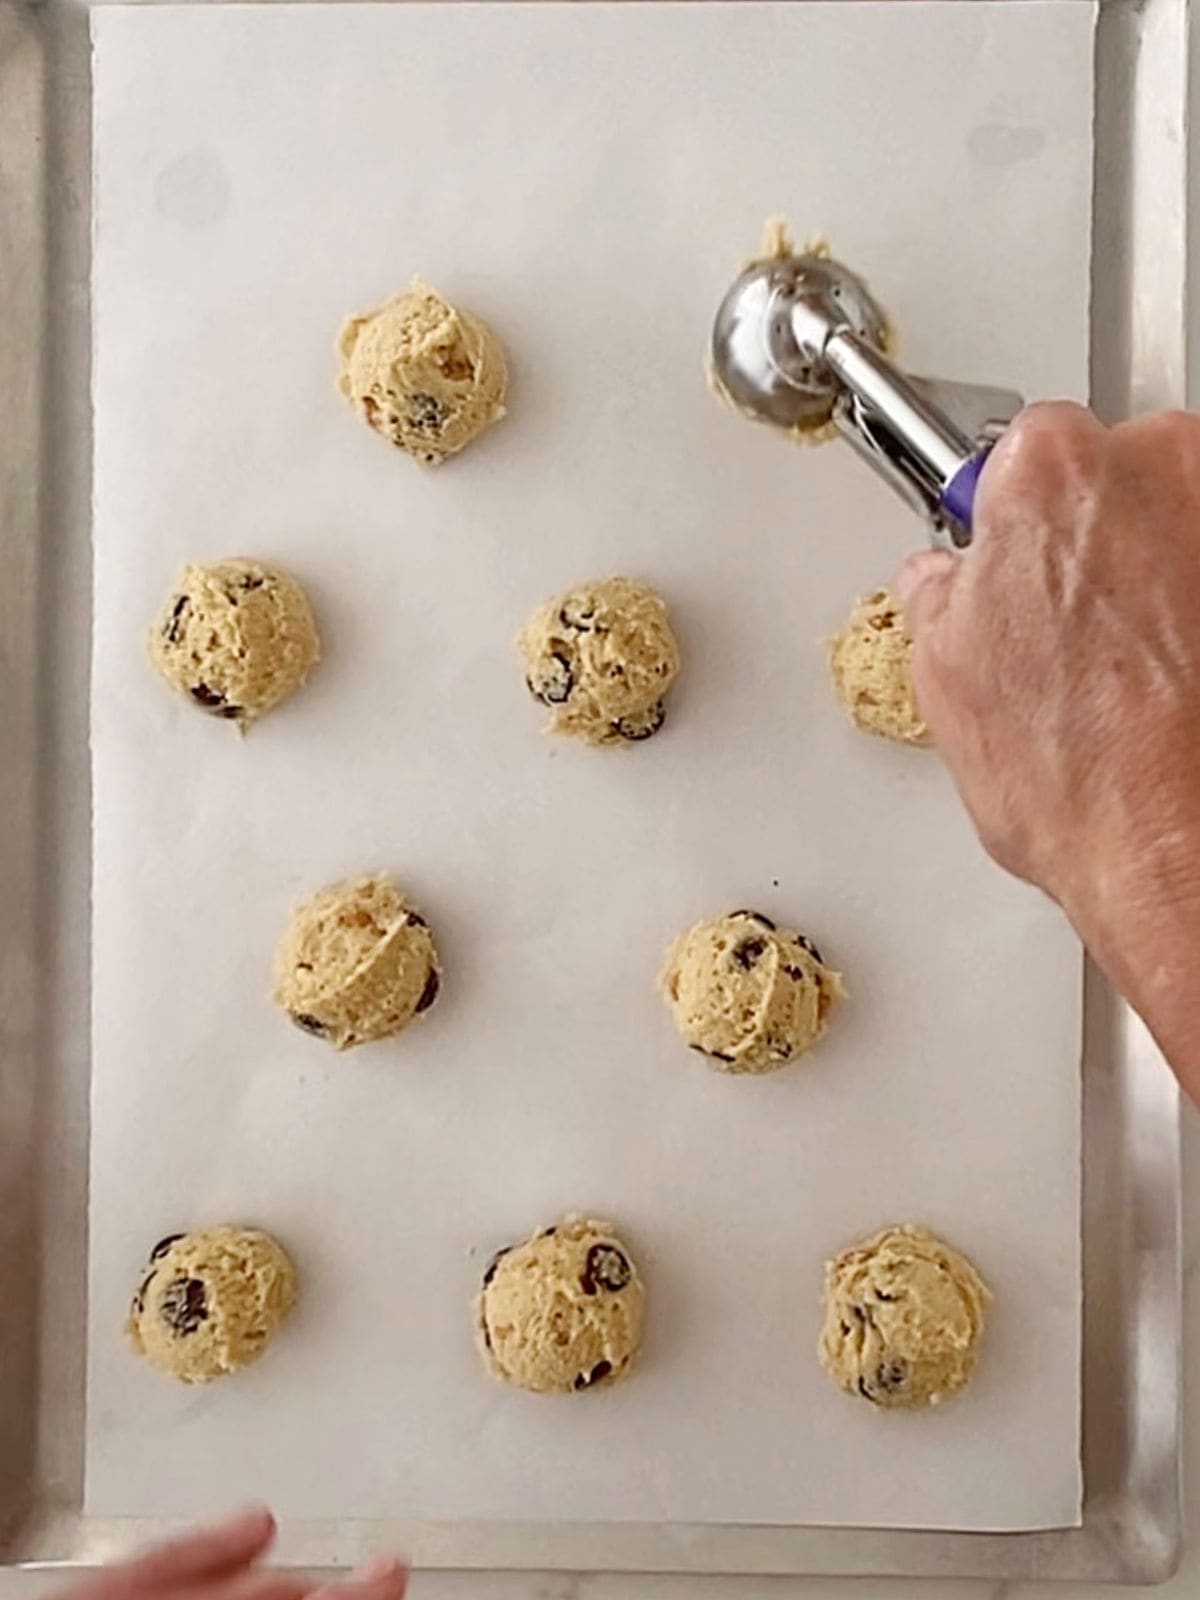 Scooping cookies on a parchment lined baking sheet. Top view.